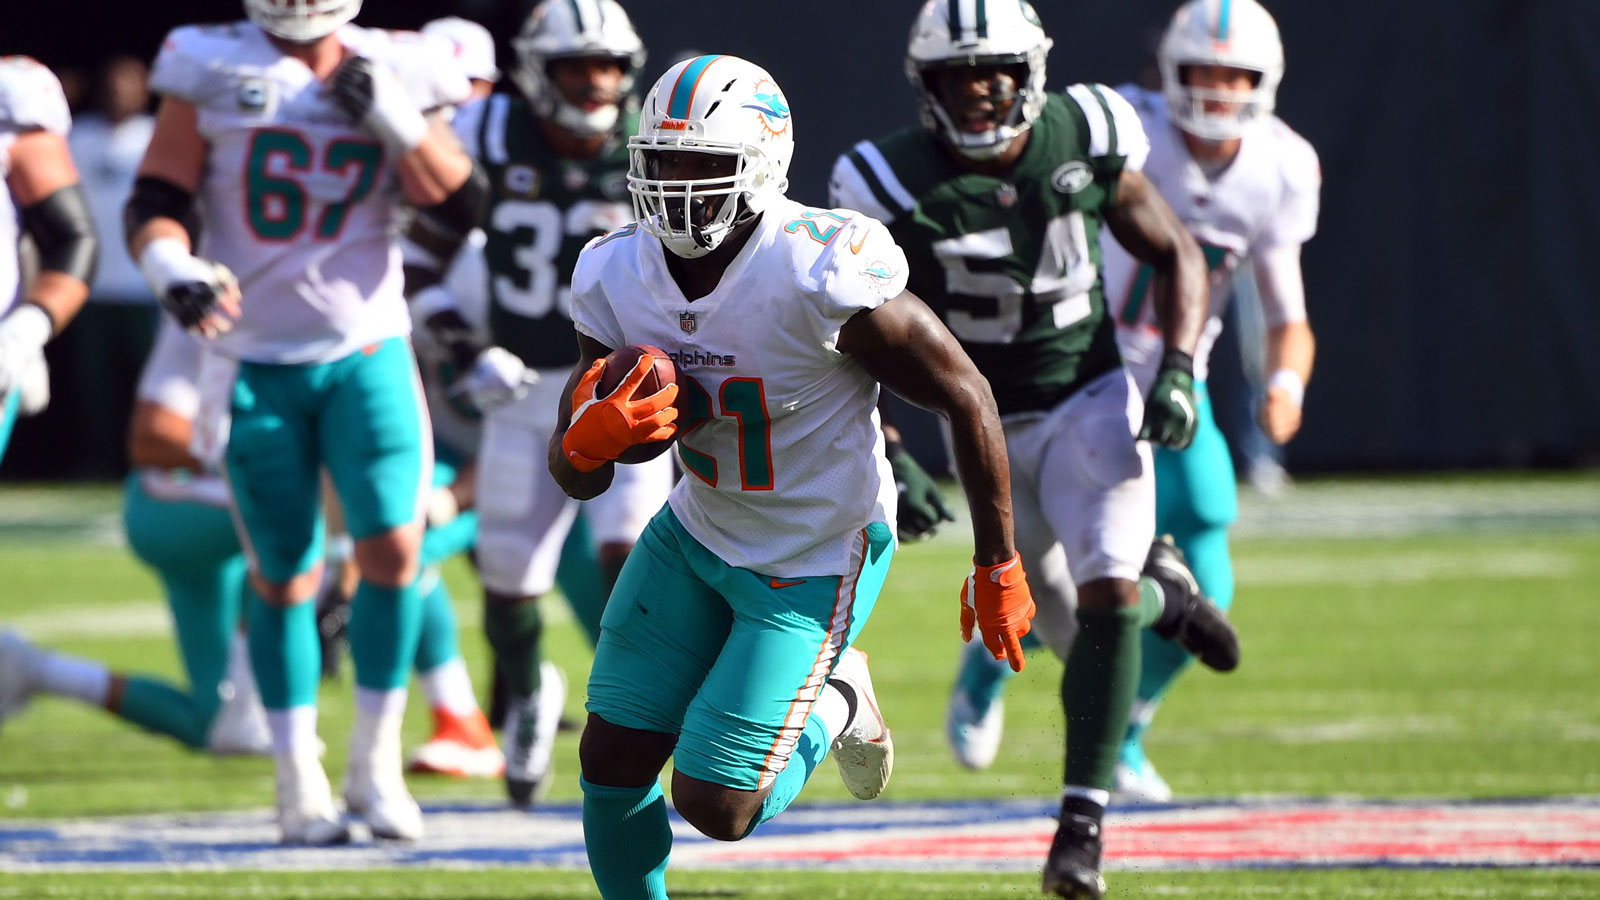 Frank Gore runs to 4th on NFL's all-time rushing list as Dolphins top Jets to improve to 2-0